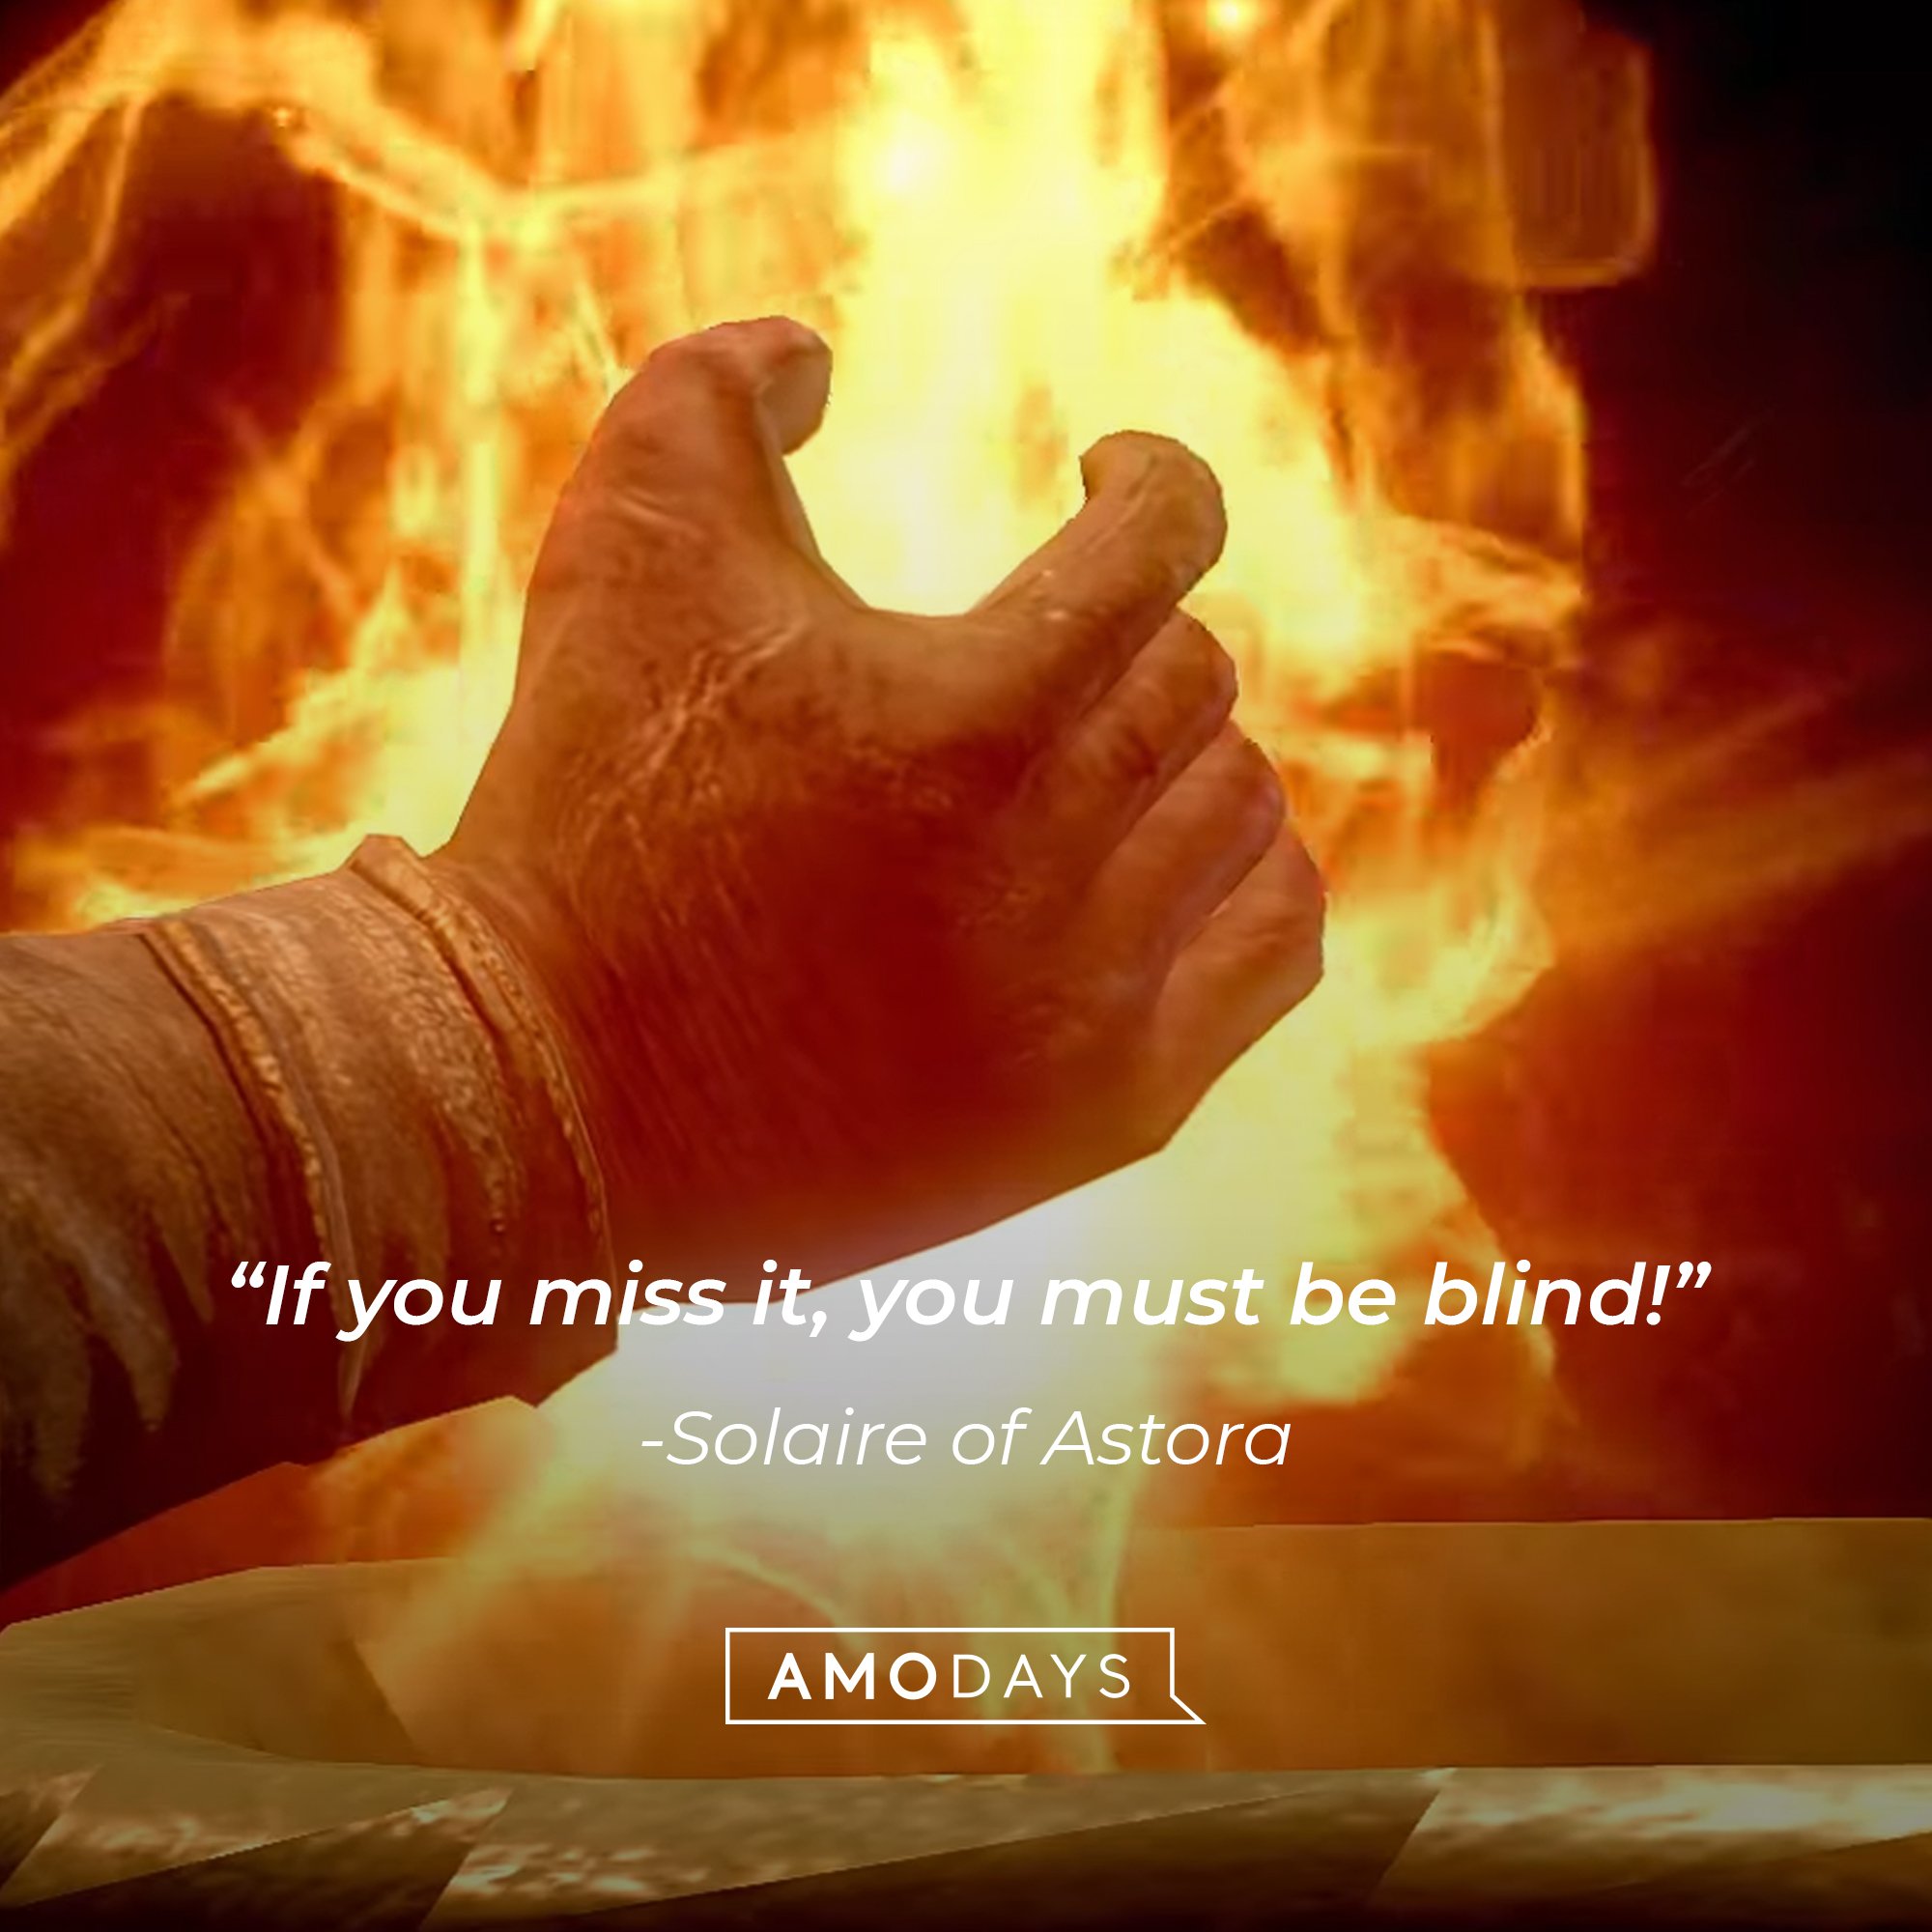 Solaire of Astora’s quote: "If you miss it, you must be blind!" | Image: AmoDays